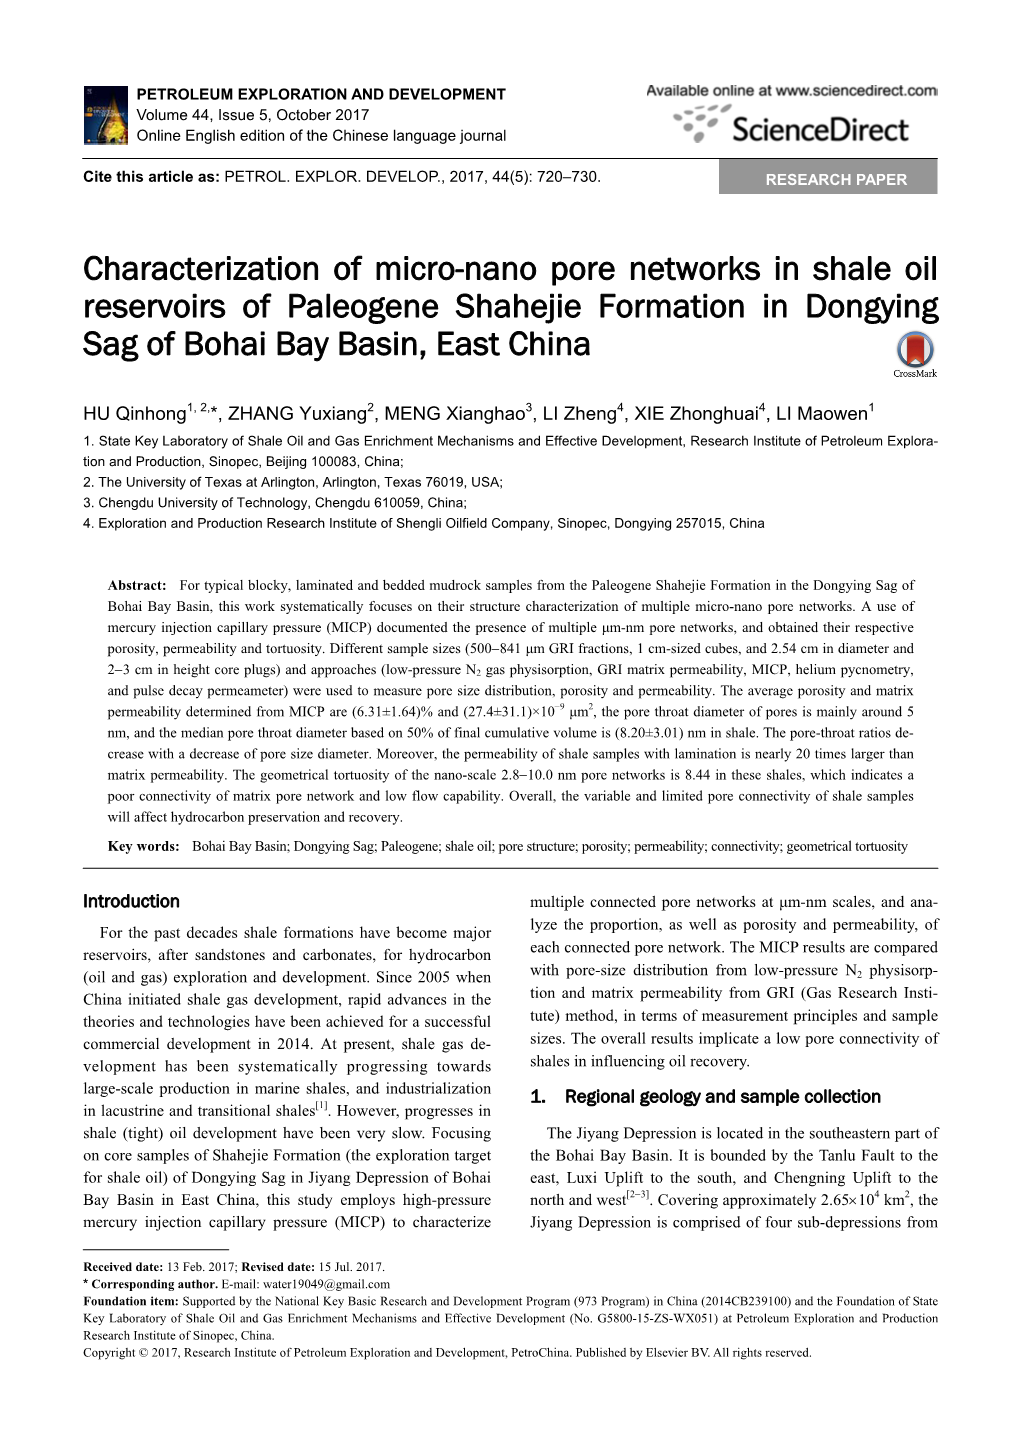 Characterization of Micro-Nano Pore Networks in Shale Oil Reservoirs of Paleogene Shahejie Formation in Dongying Sag of Bohai Bay Basin, East China